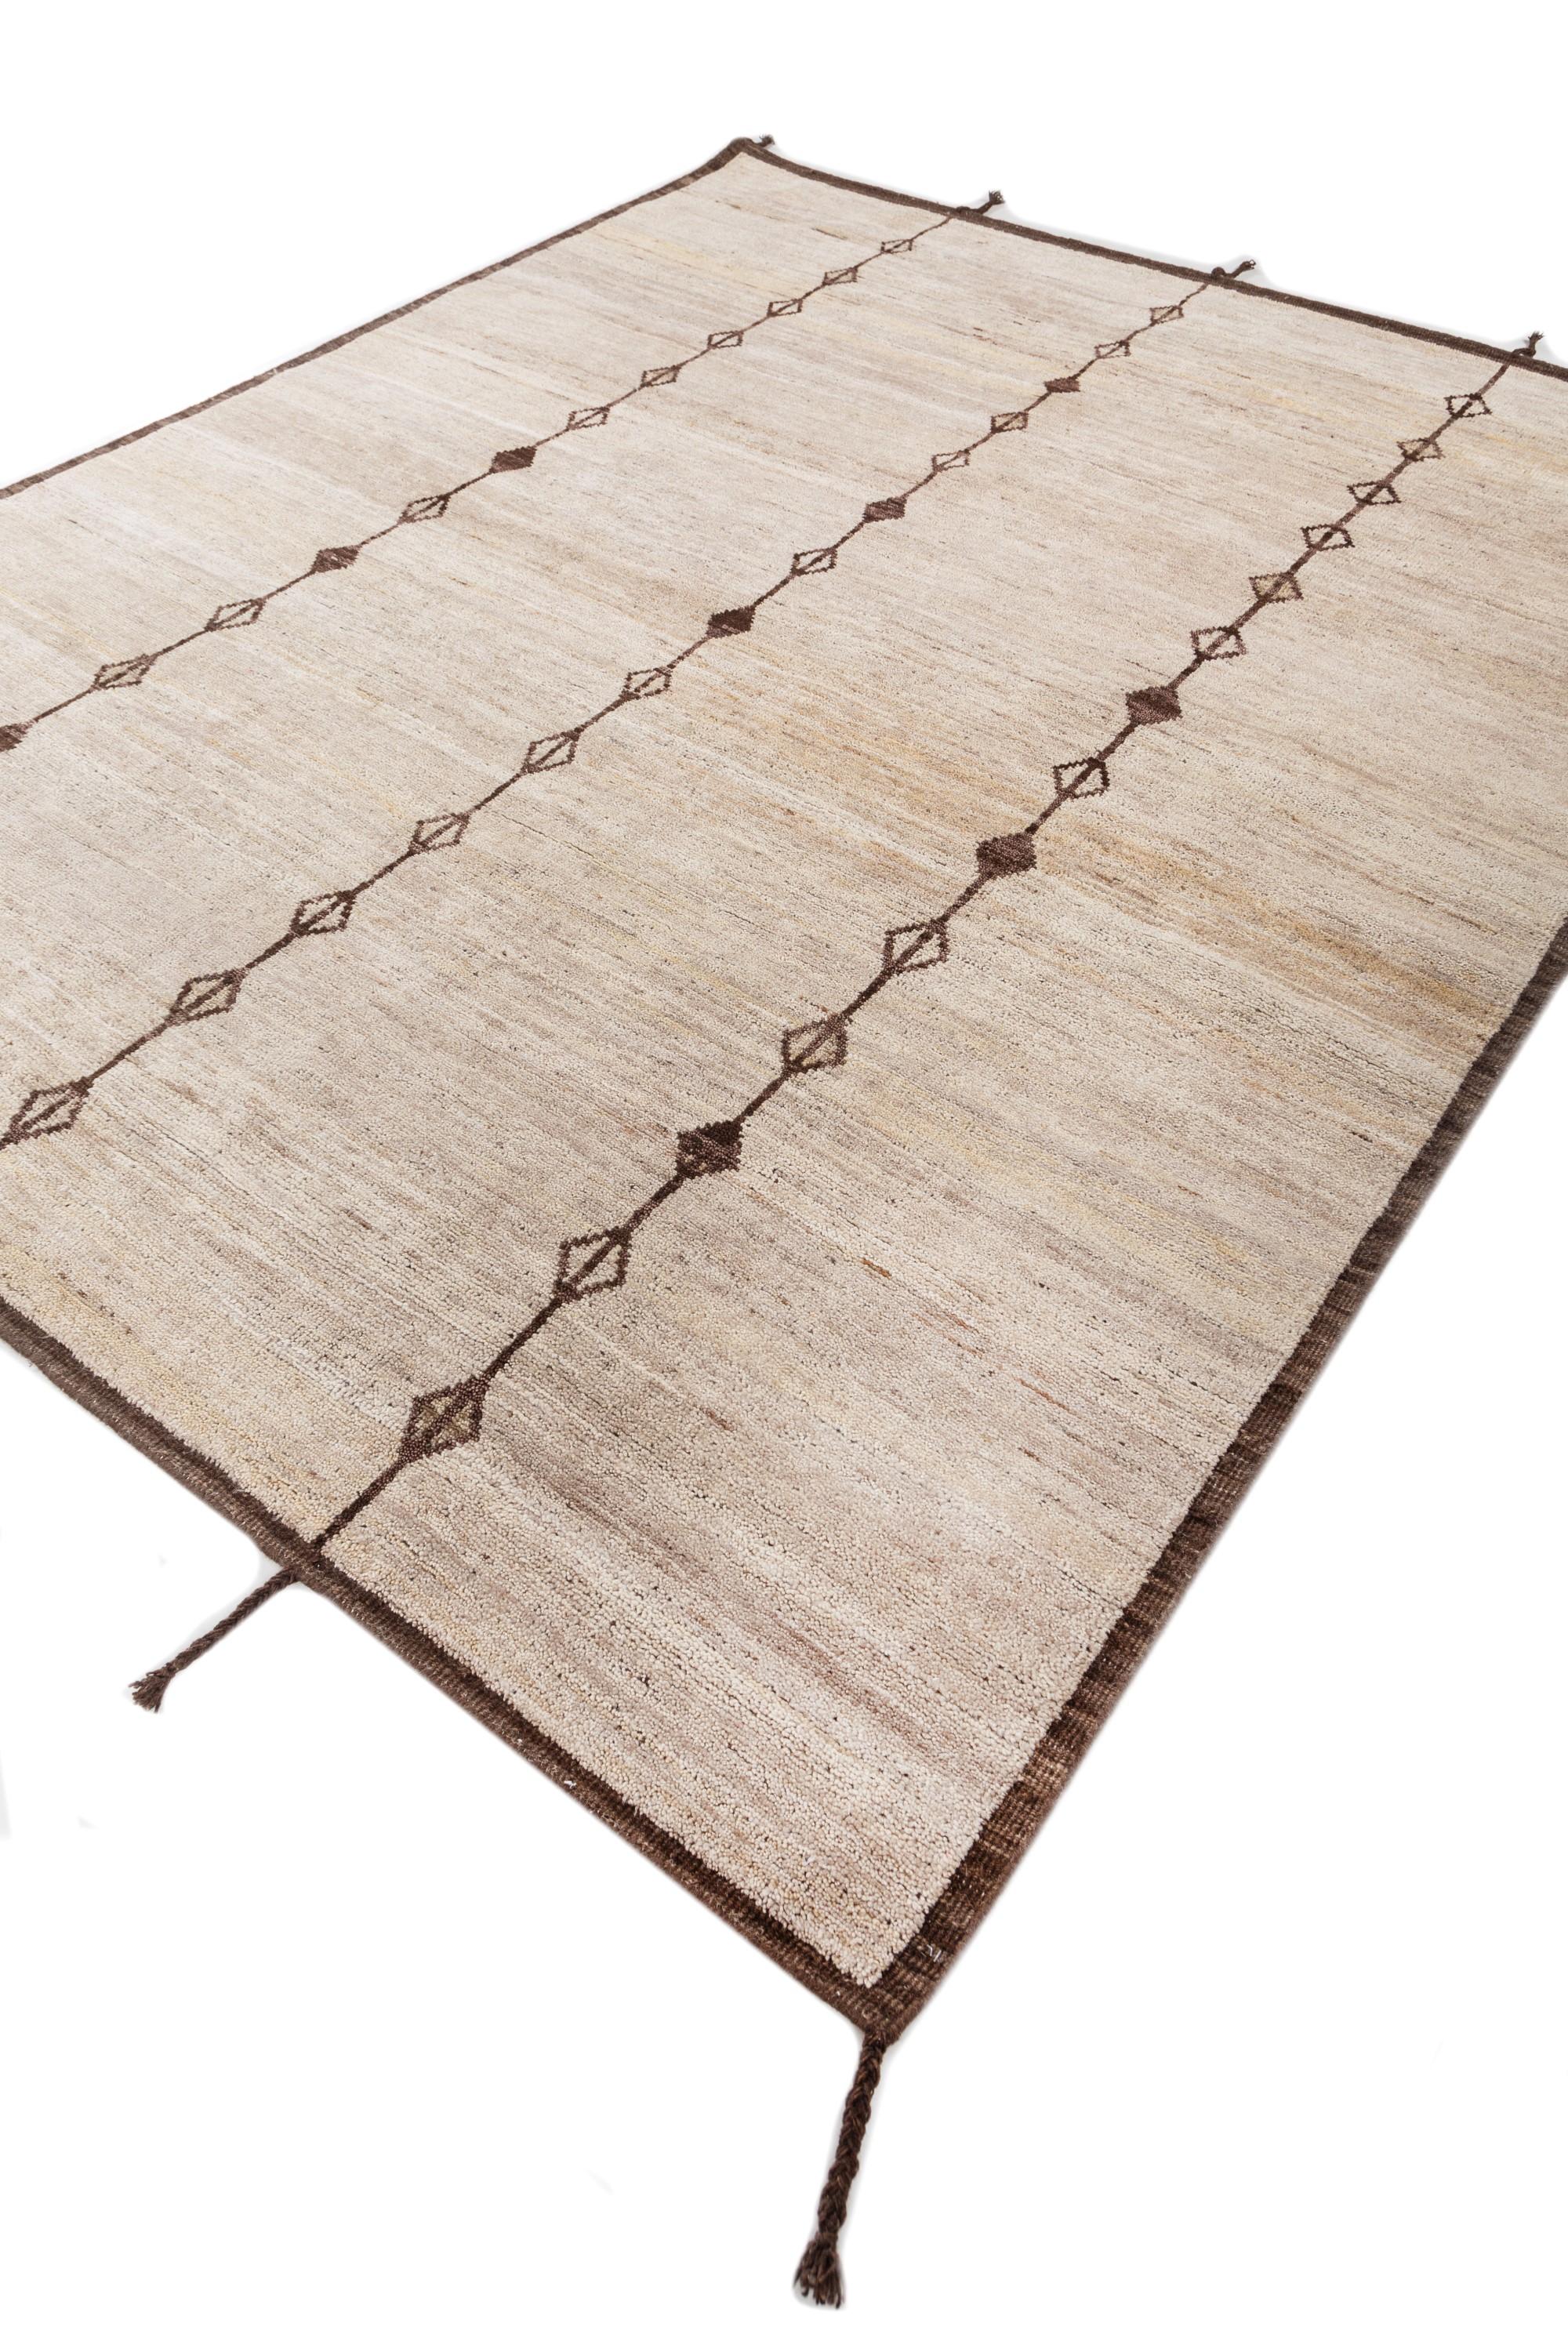 Indian Sublime Hush Soft Beige & Cola 240X300 cm Handknotted Rug For Sale